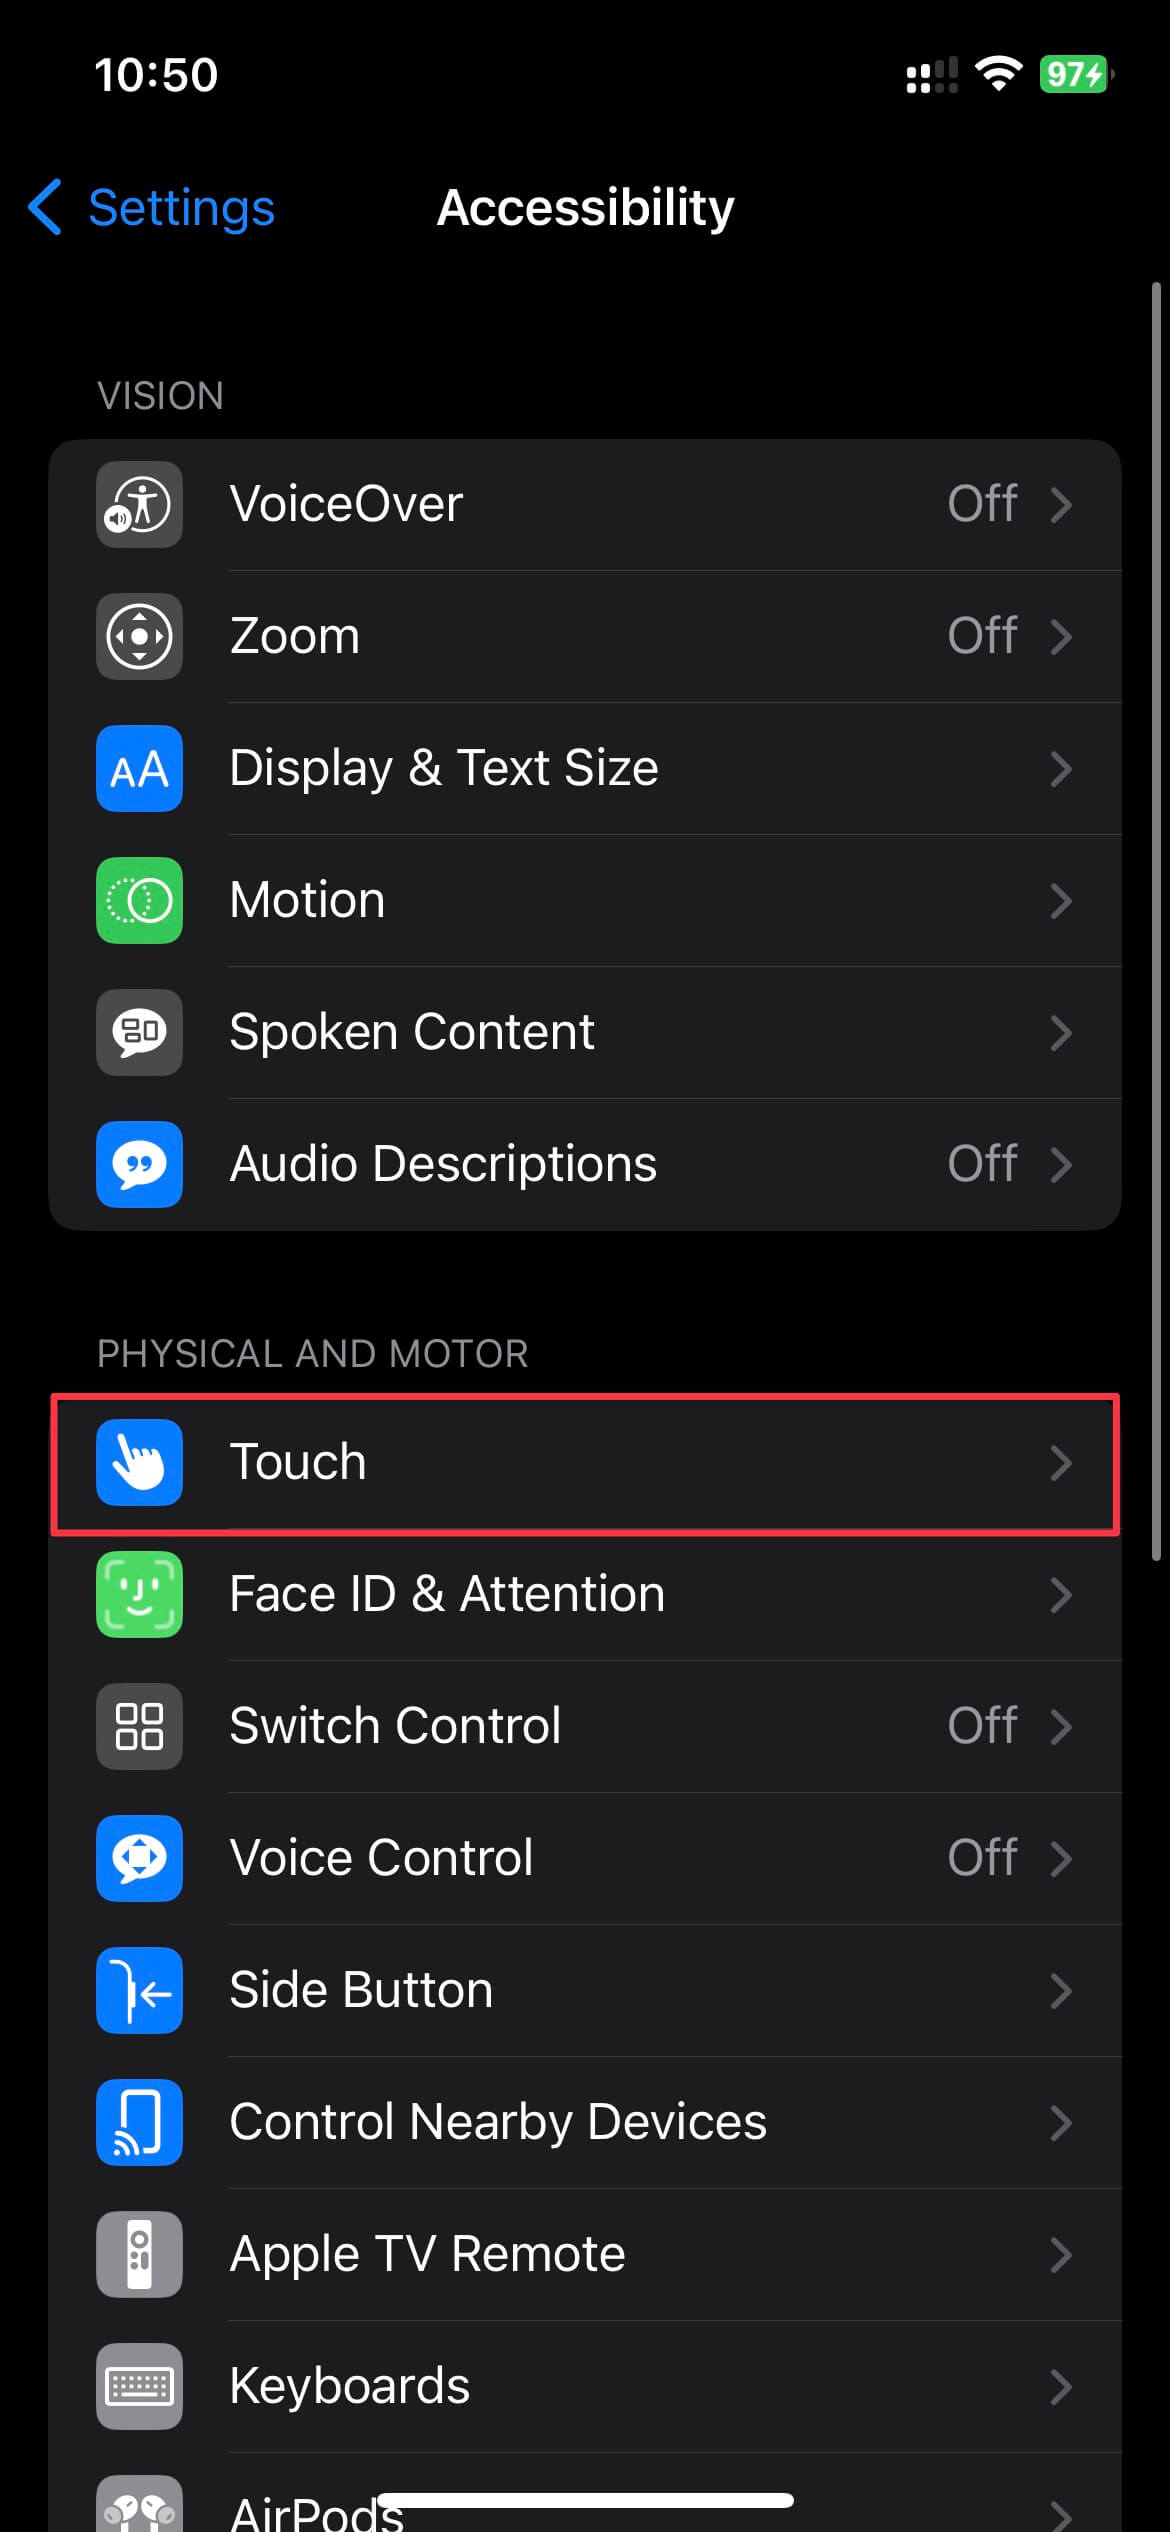 Select Touch under Accessibility settings